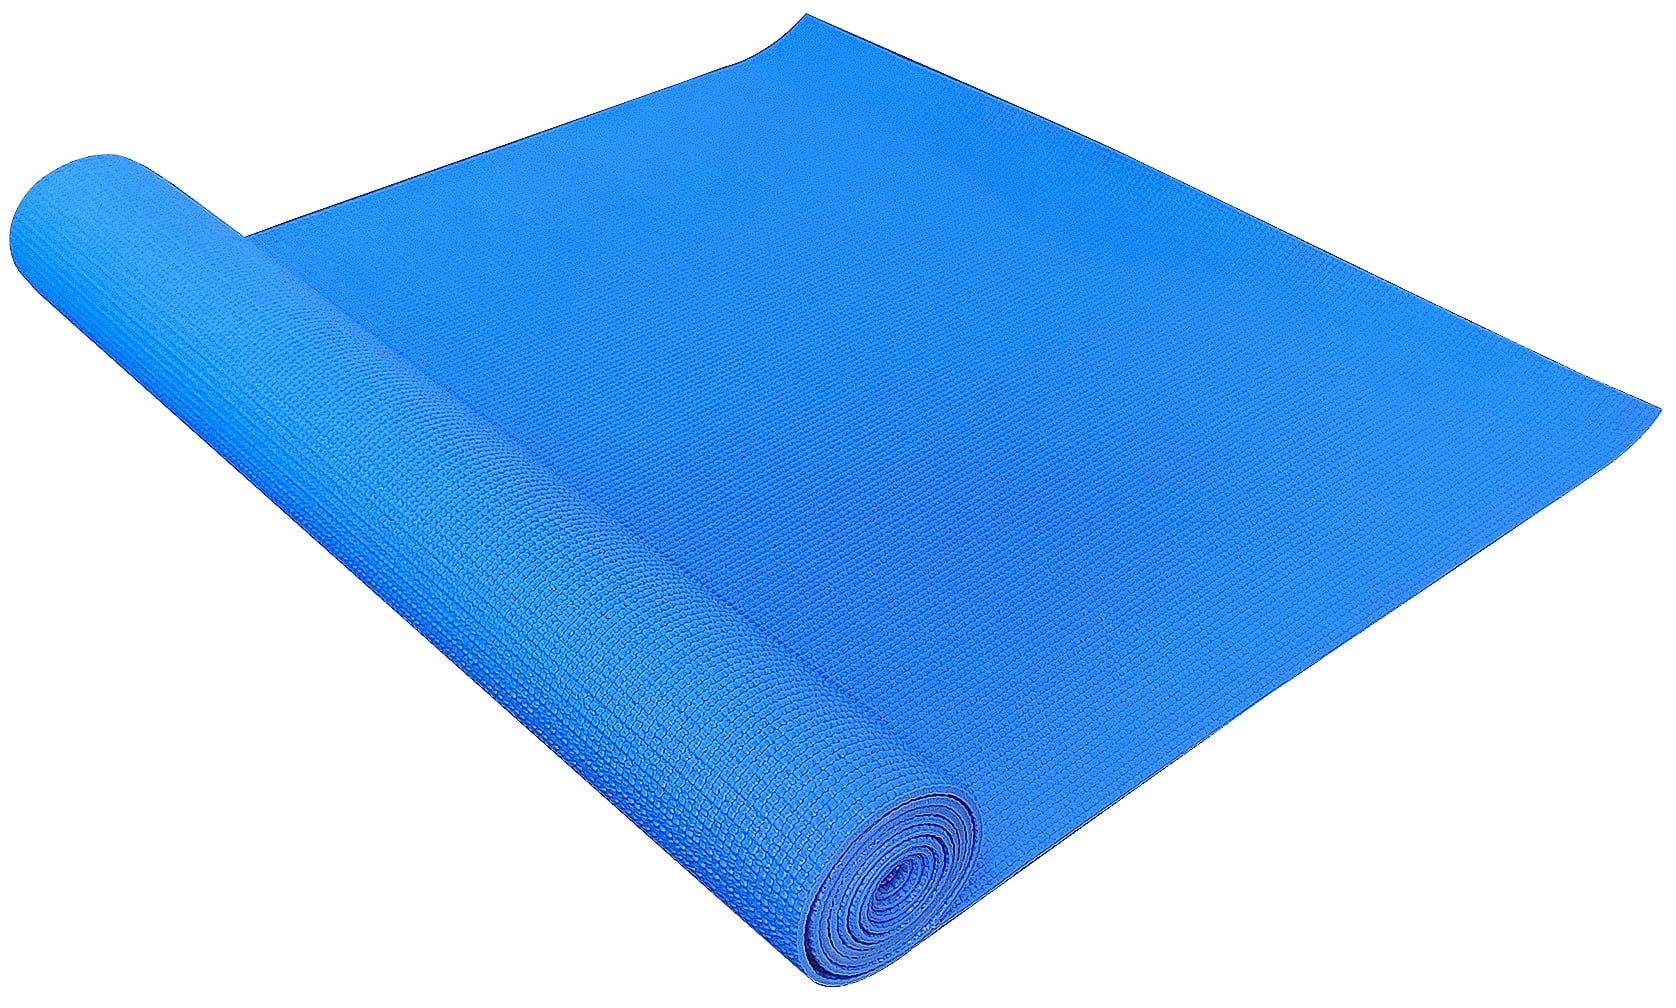 3mm Thick Yoga Mats Non Slip Exercise Gym Fitness Pilates Physio Foam Camping 